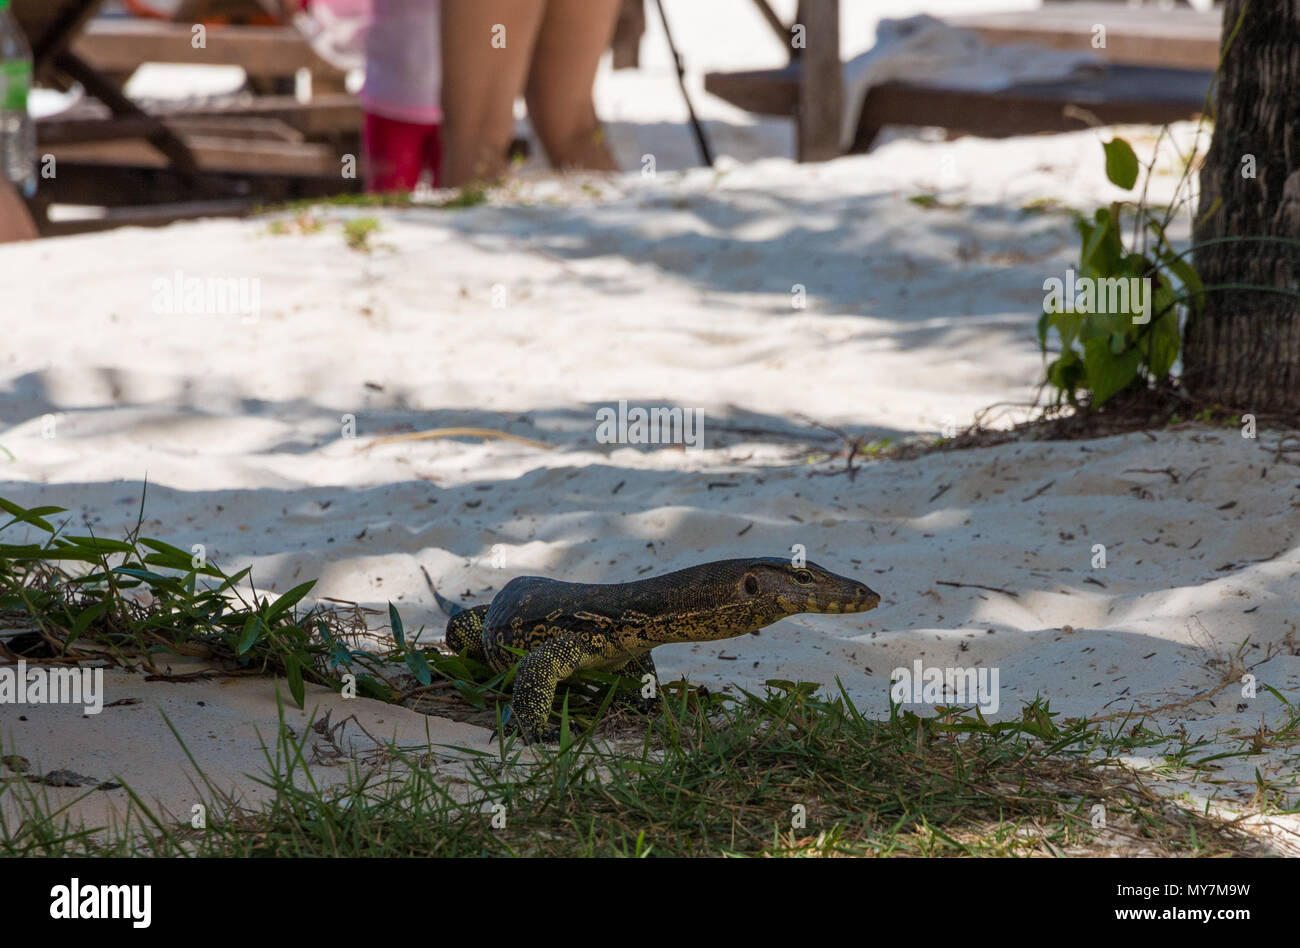 A young monitor lizard, probably a Varanus salvator with a beautiful pattern on its skin is standing near tourists on the beach. Stock Photo